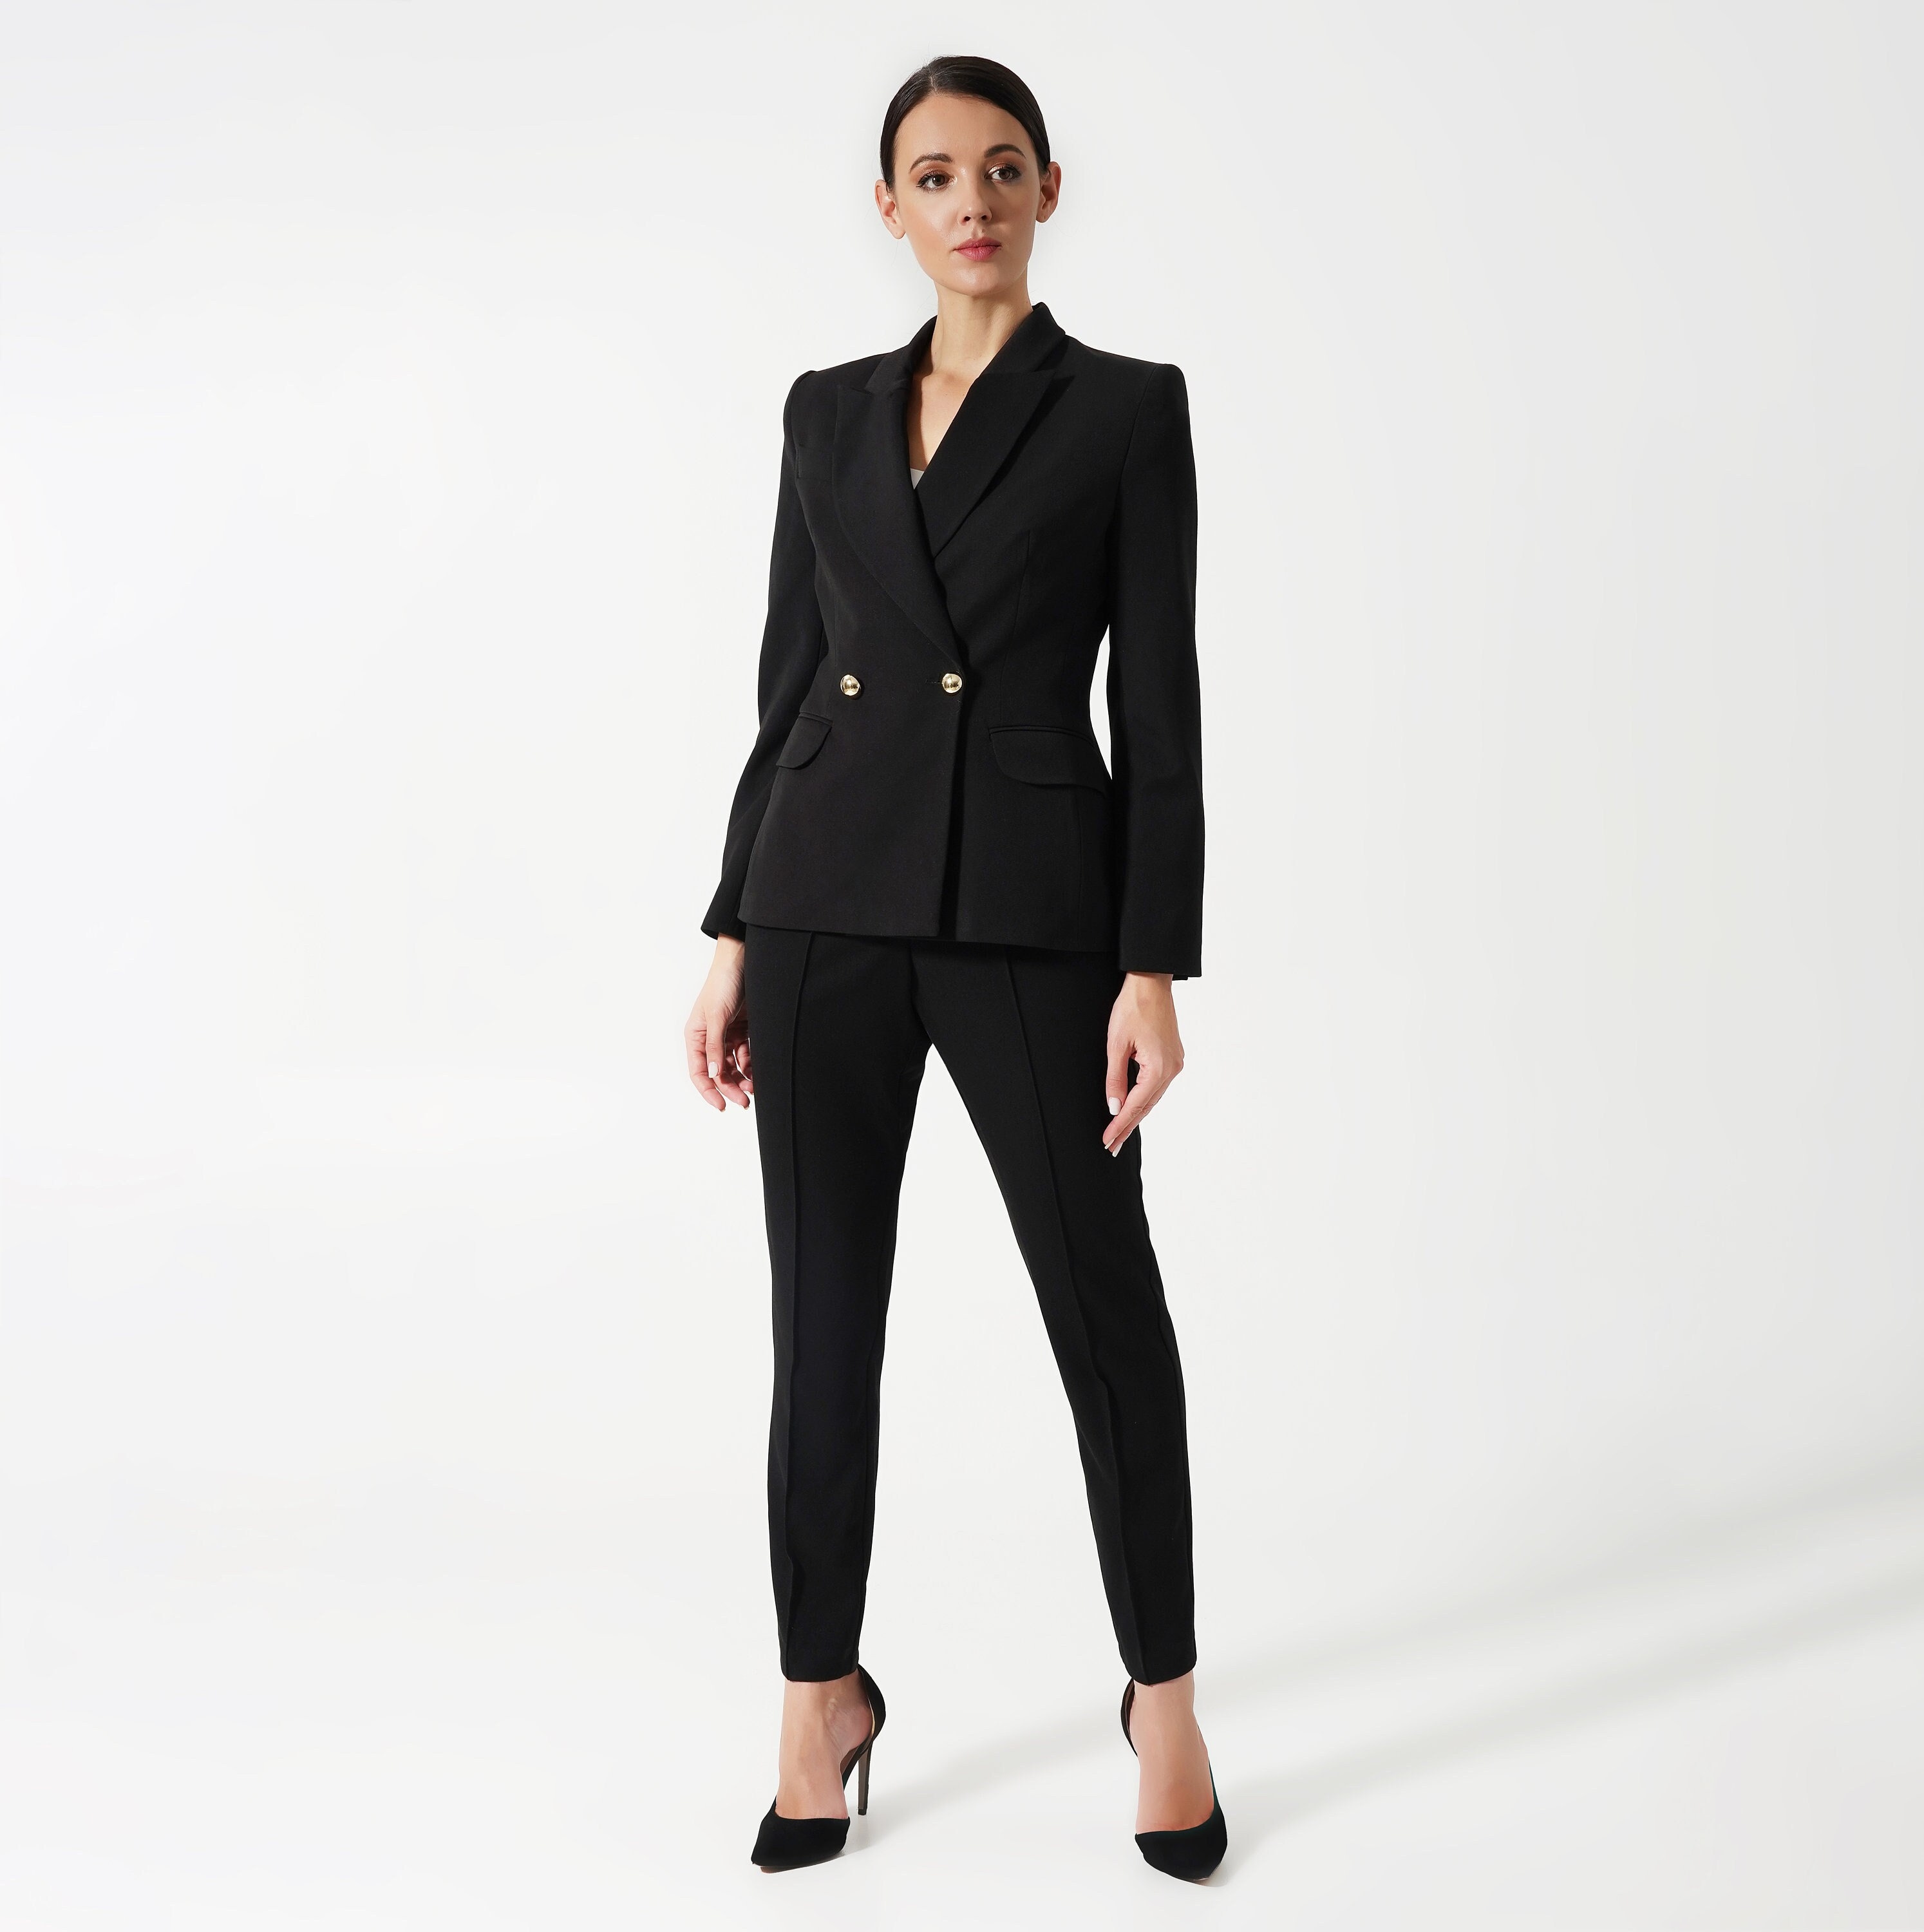 Black Pant Suit Women, Black Business Suit for Ladies, Classic Womens  Tuxedo Suit Jacket, Double Breasted Blazer and Pegged Pants TAVROVSKA -   Canada